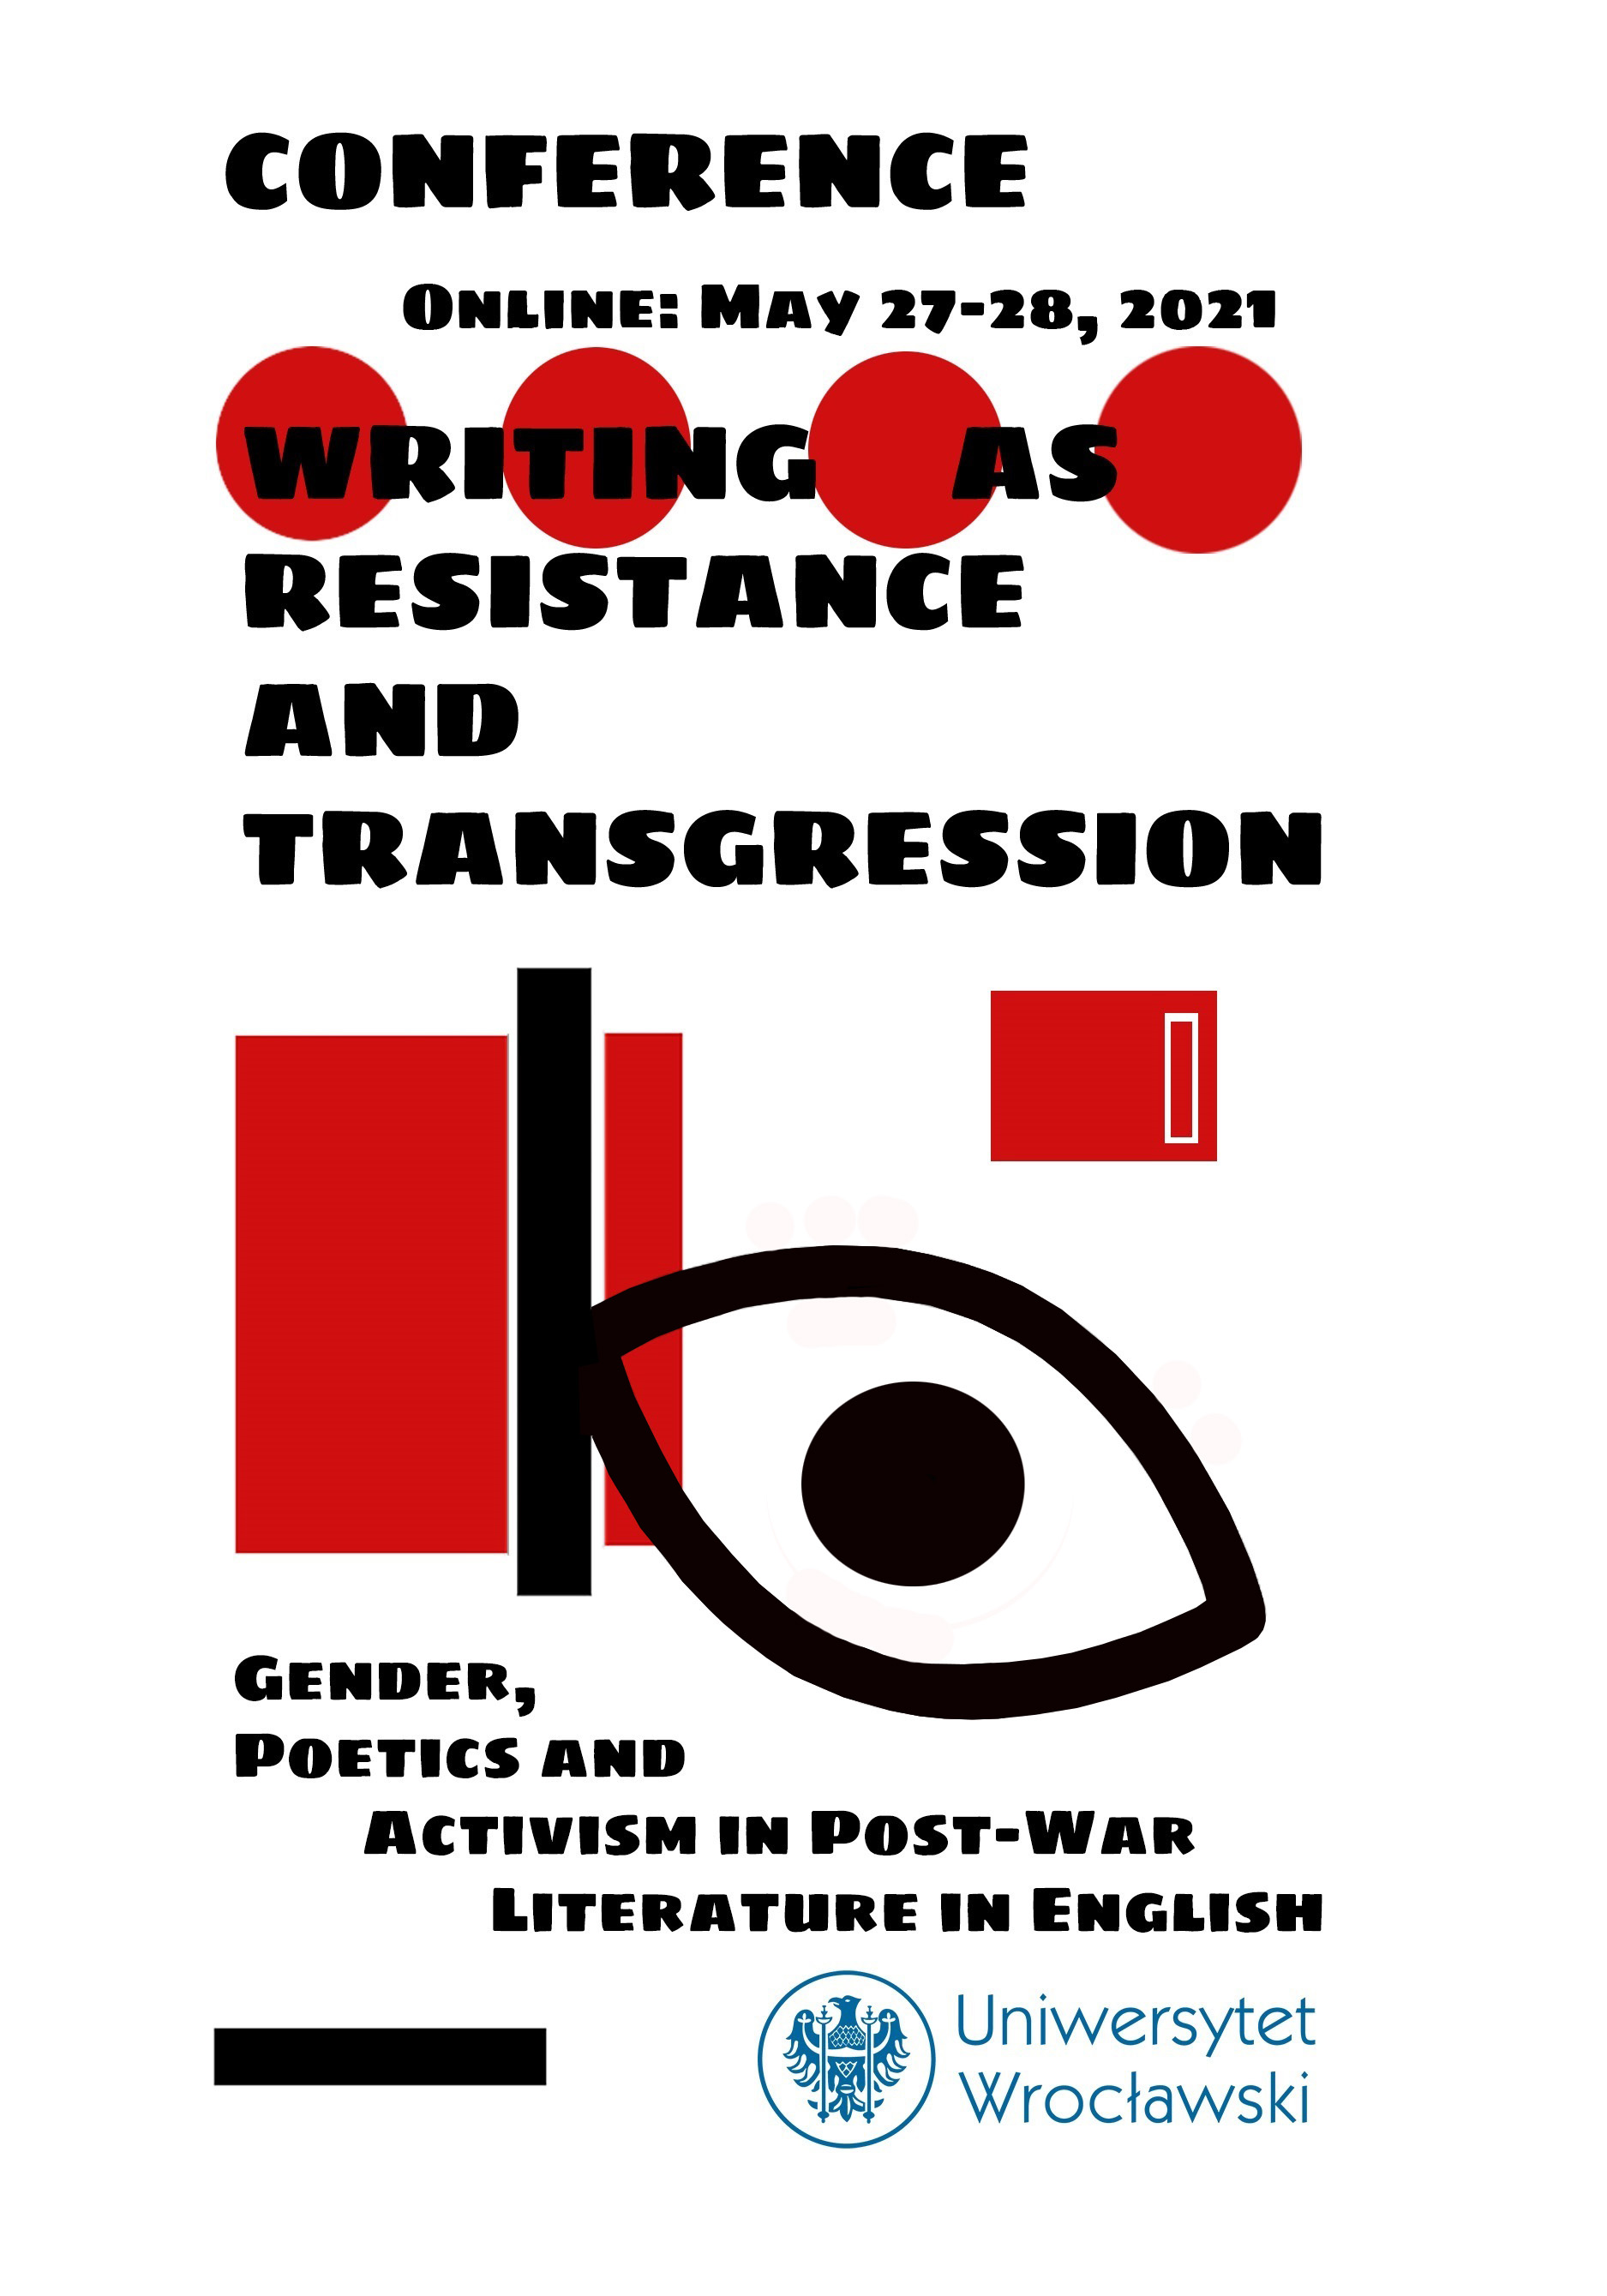 Allegato post-531212-Poster_WritingAsResistance_UWr_IFA_Conference.jpg